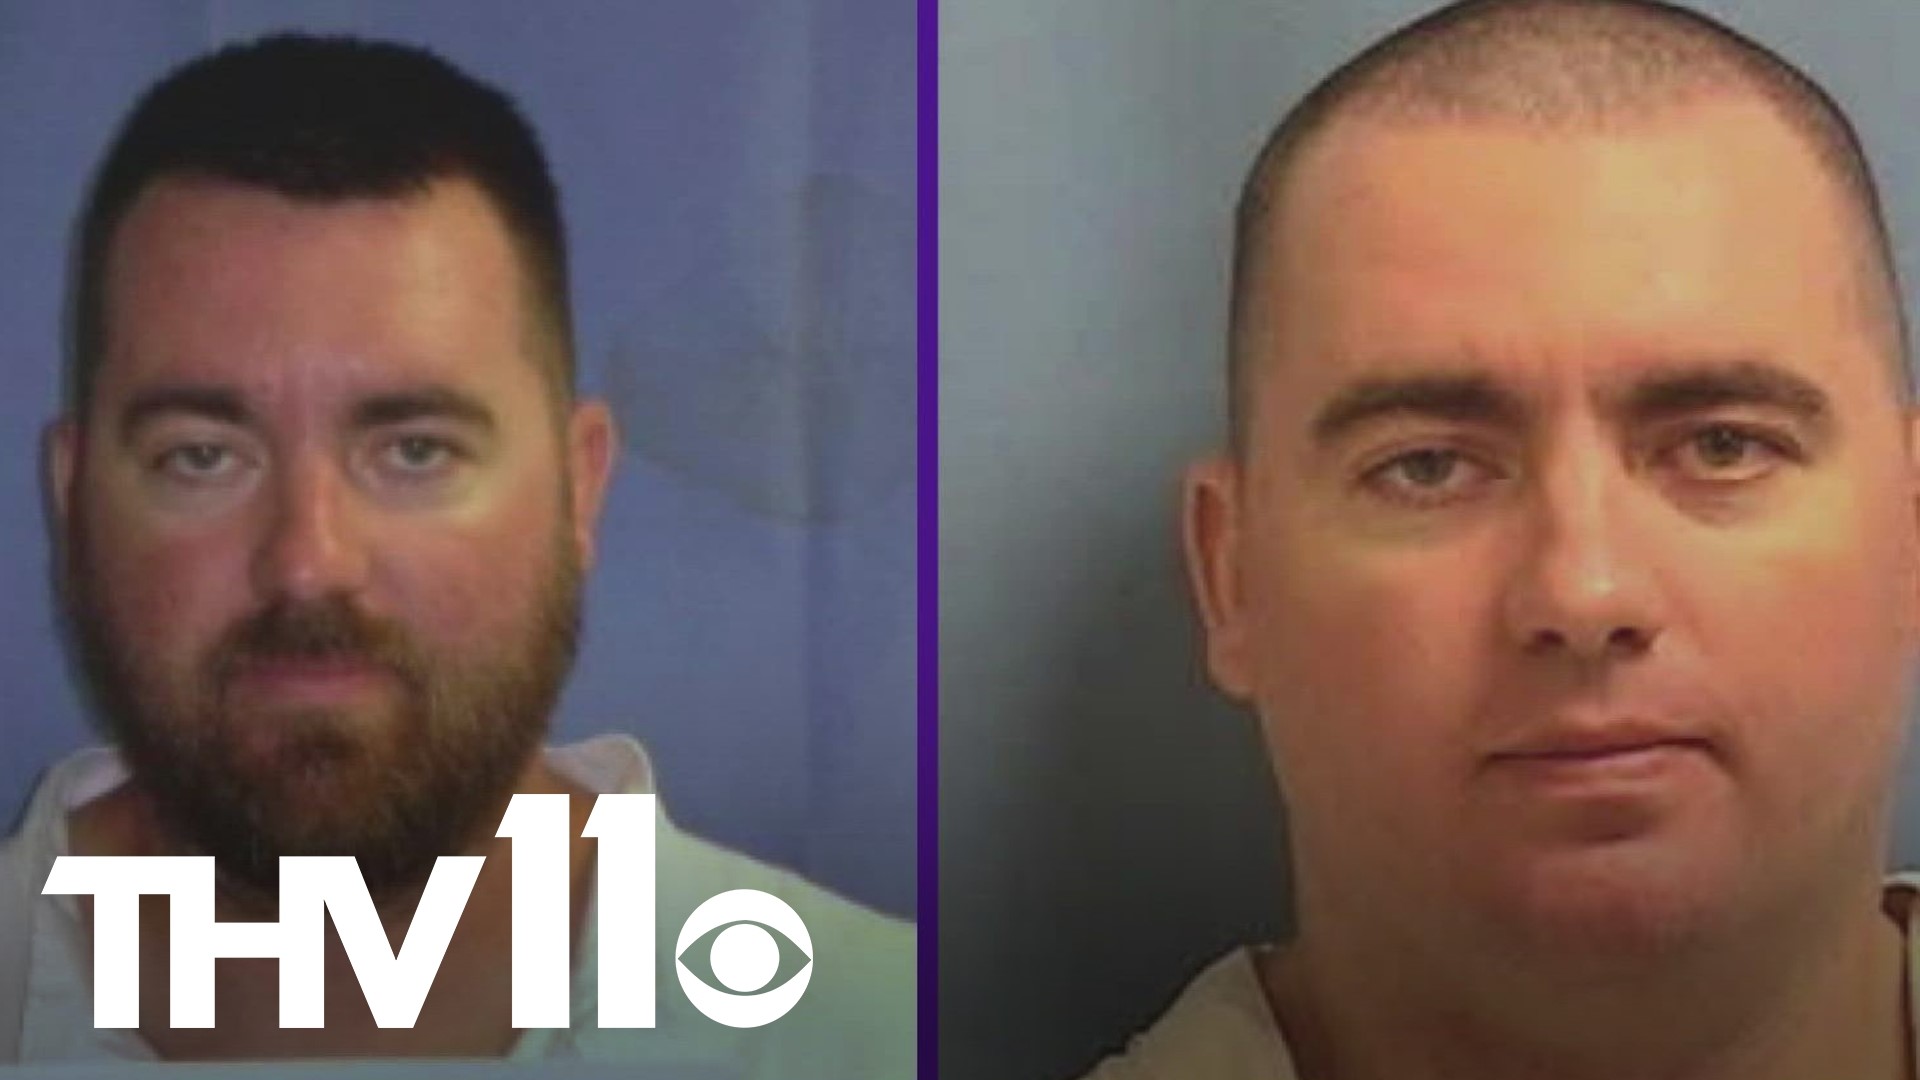 The search for escaped inmate Samuel Hartman continues. He had been serving a life sentence after being convicted of rape and is deemed armed and dangerous.